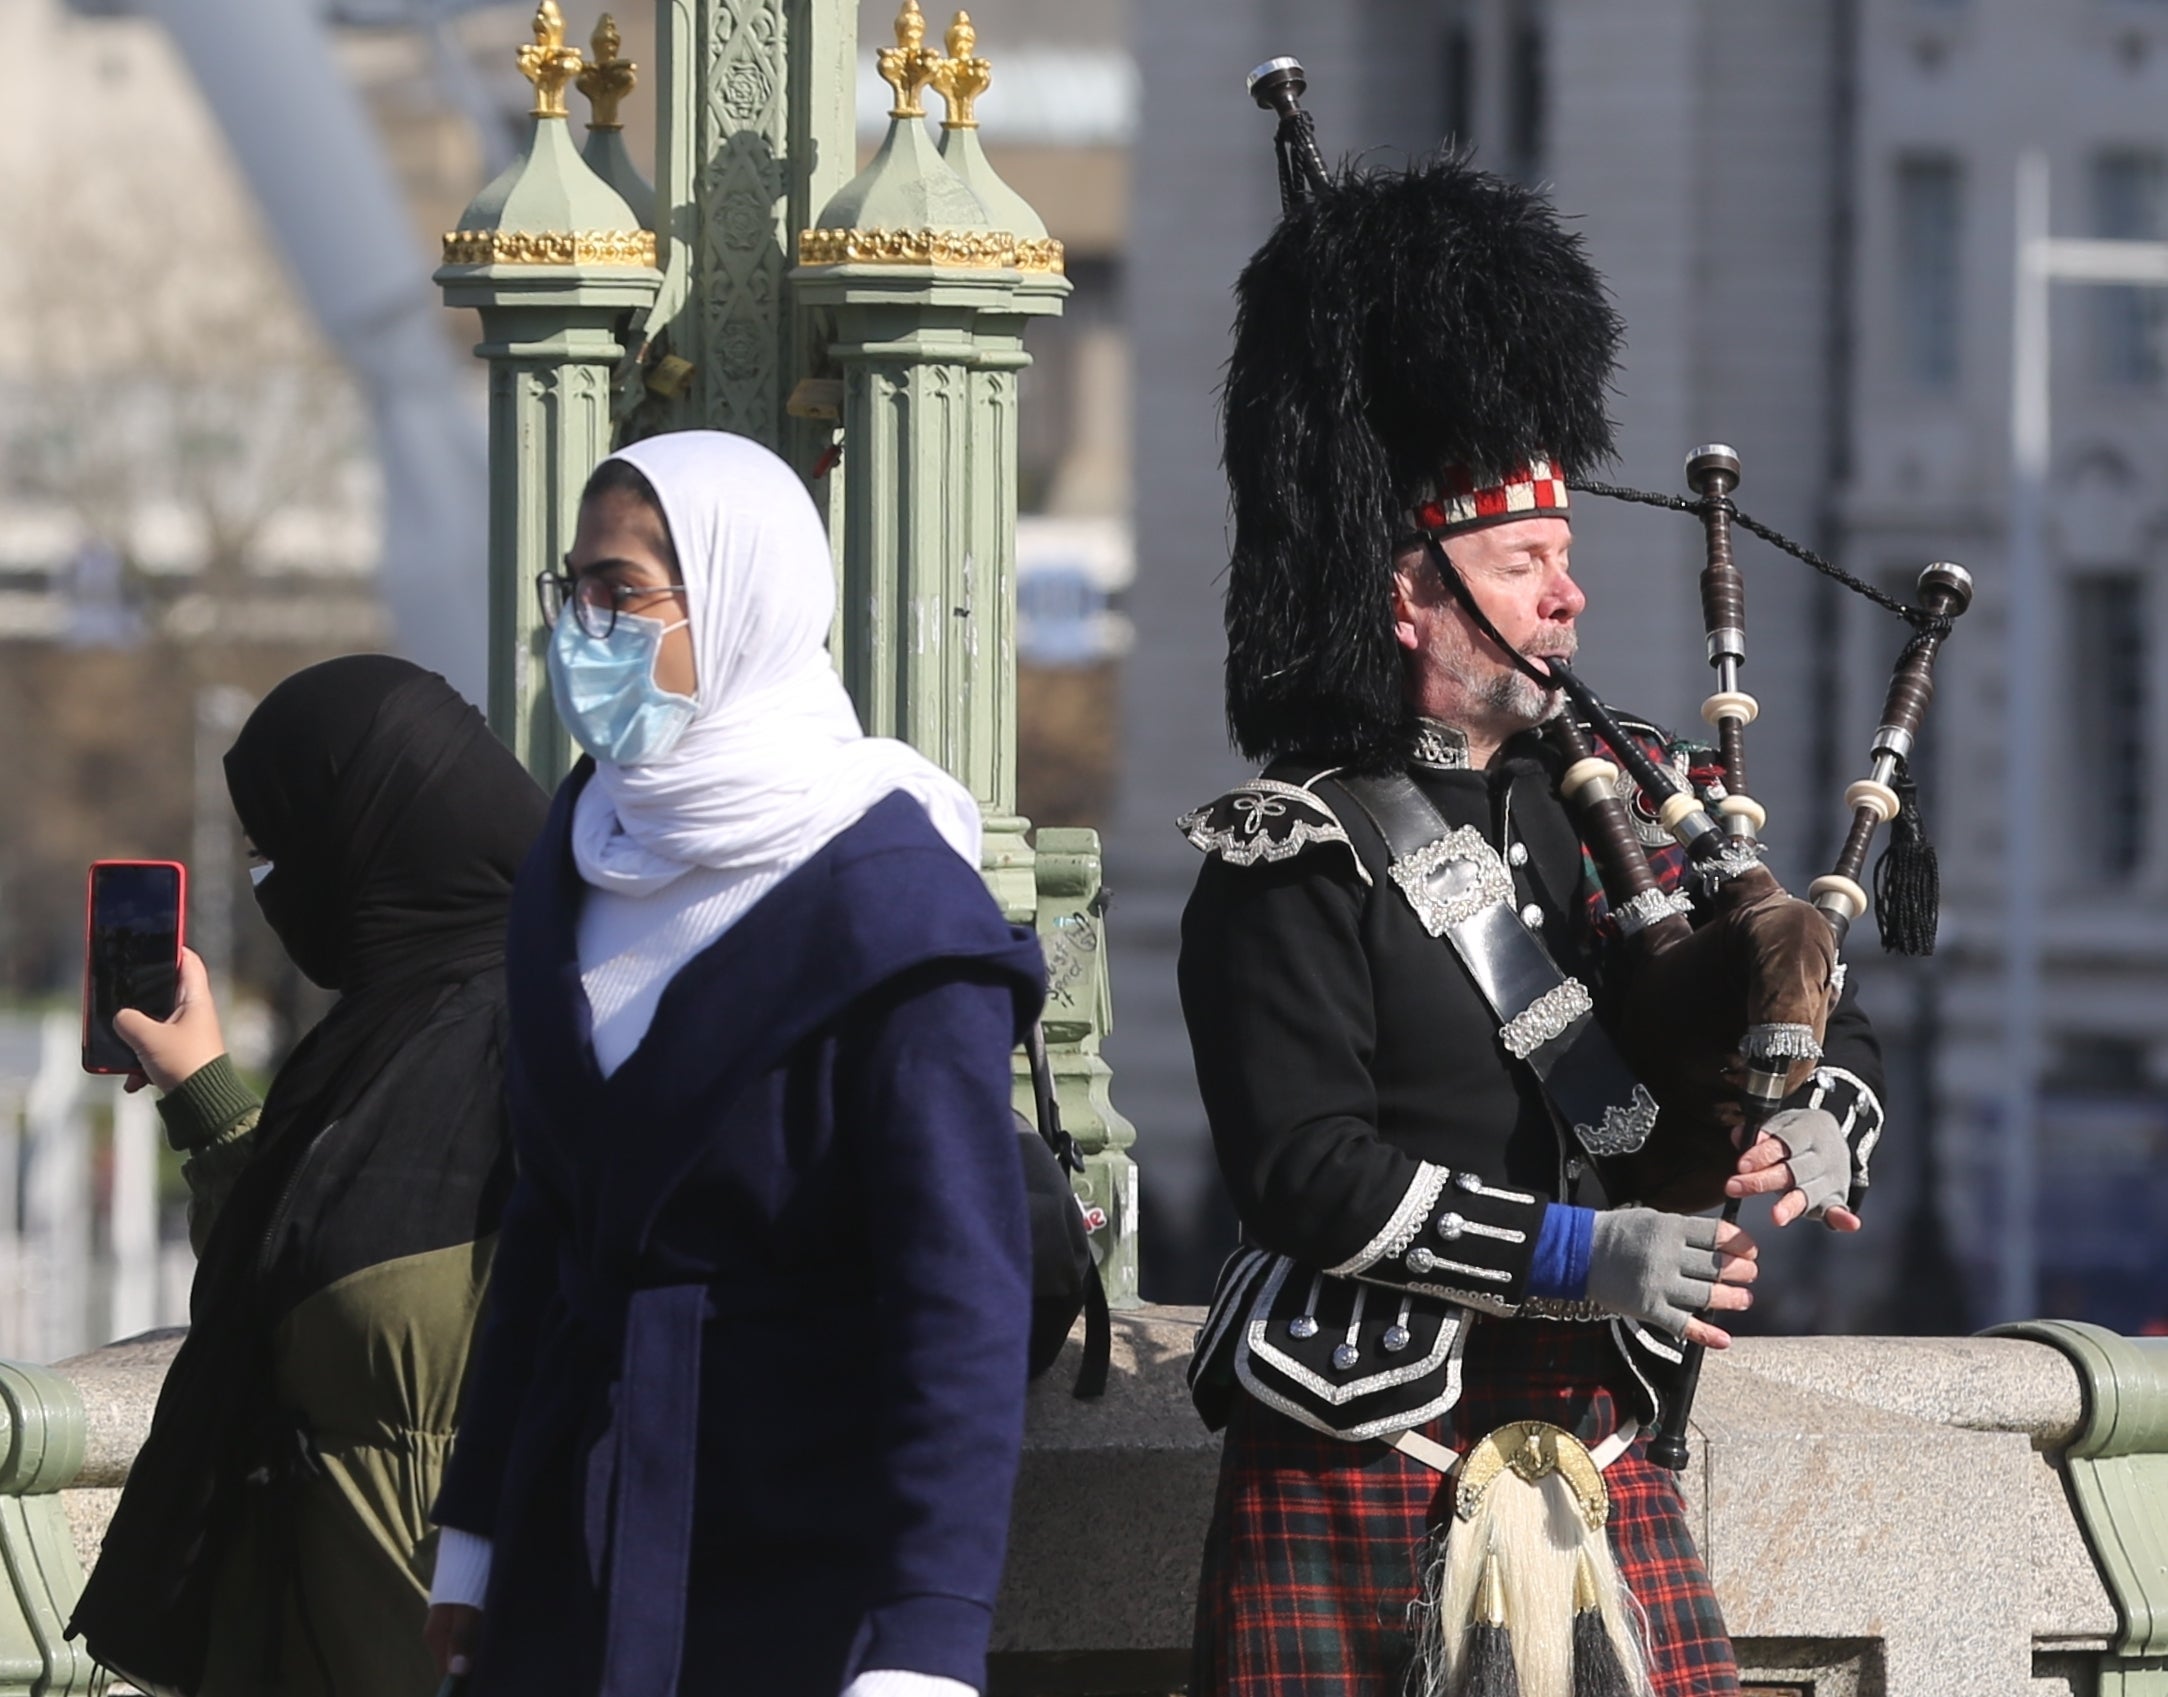 Masks are being worn all around the world as seen here on Westminster Bridge in London (Getty)